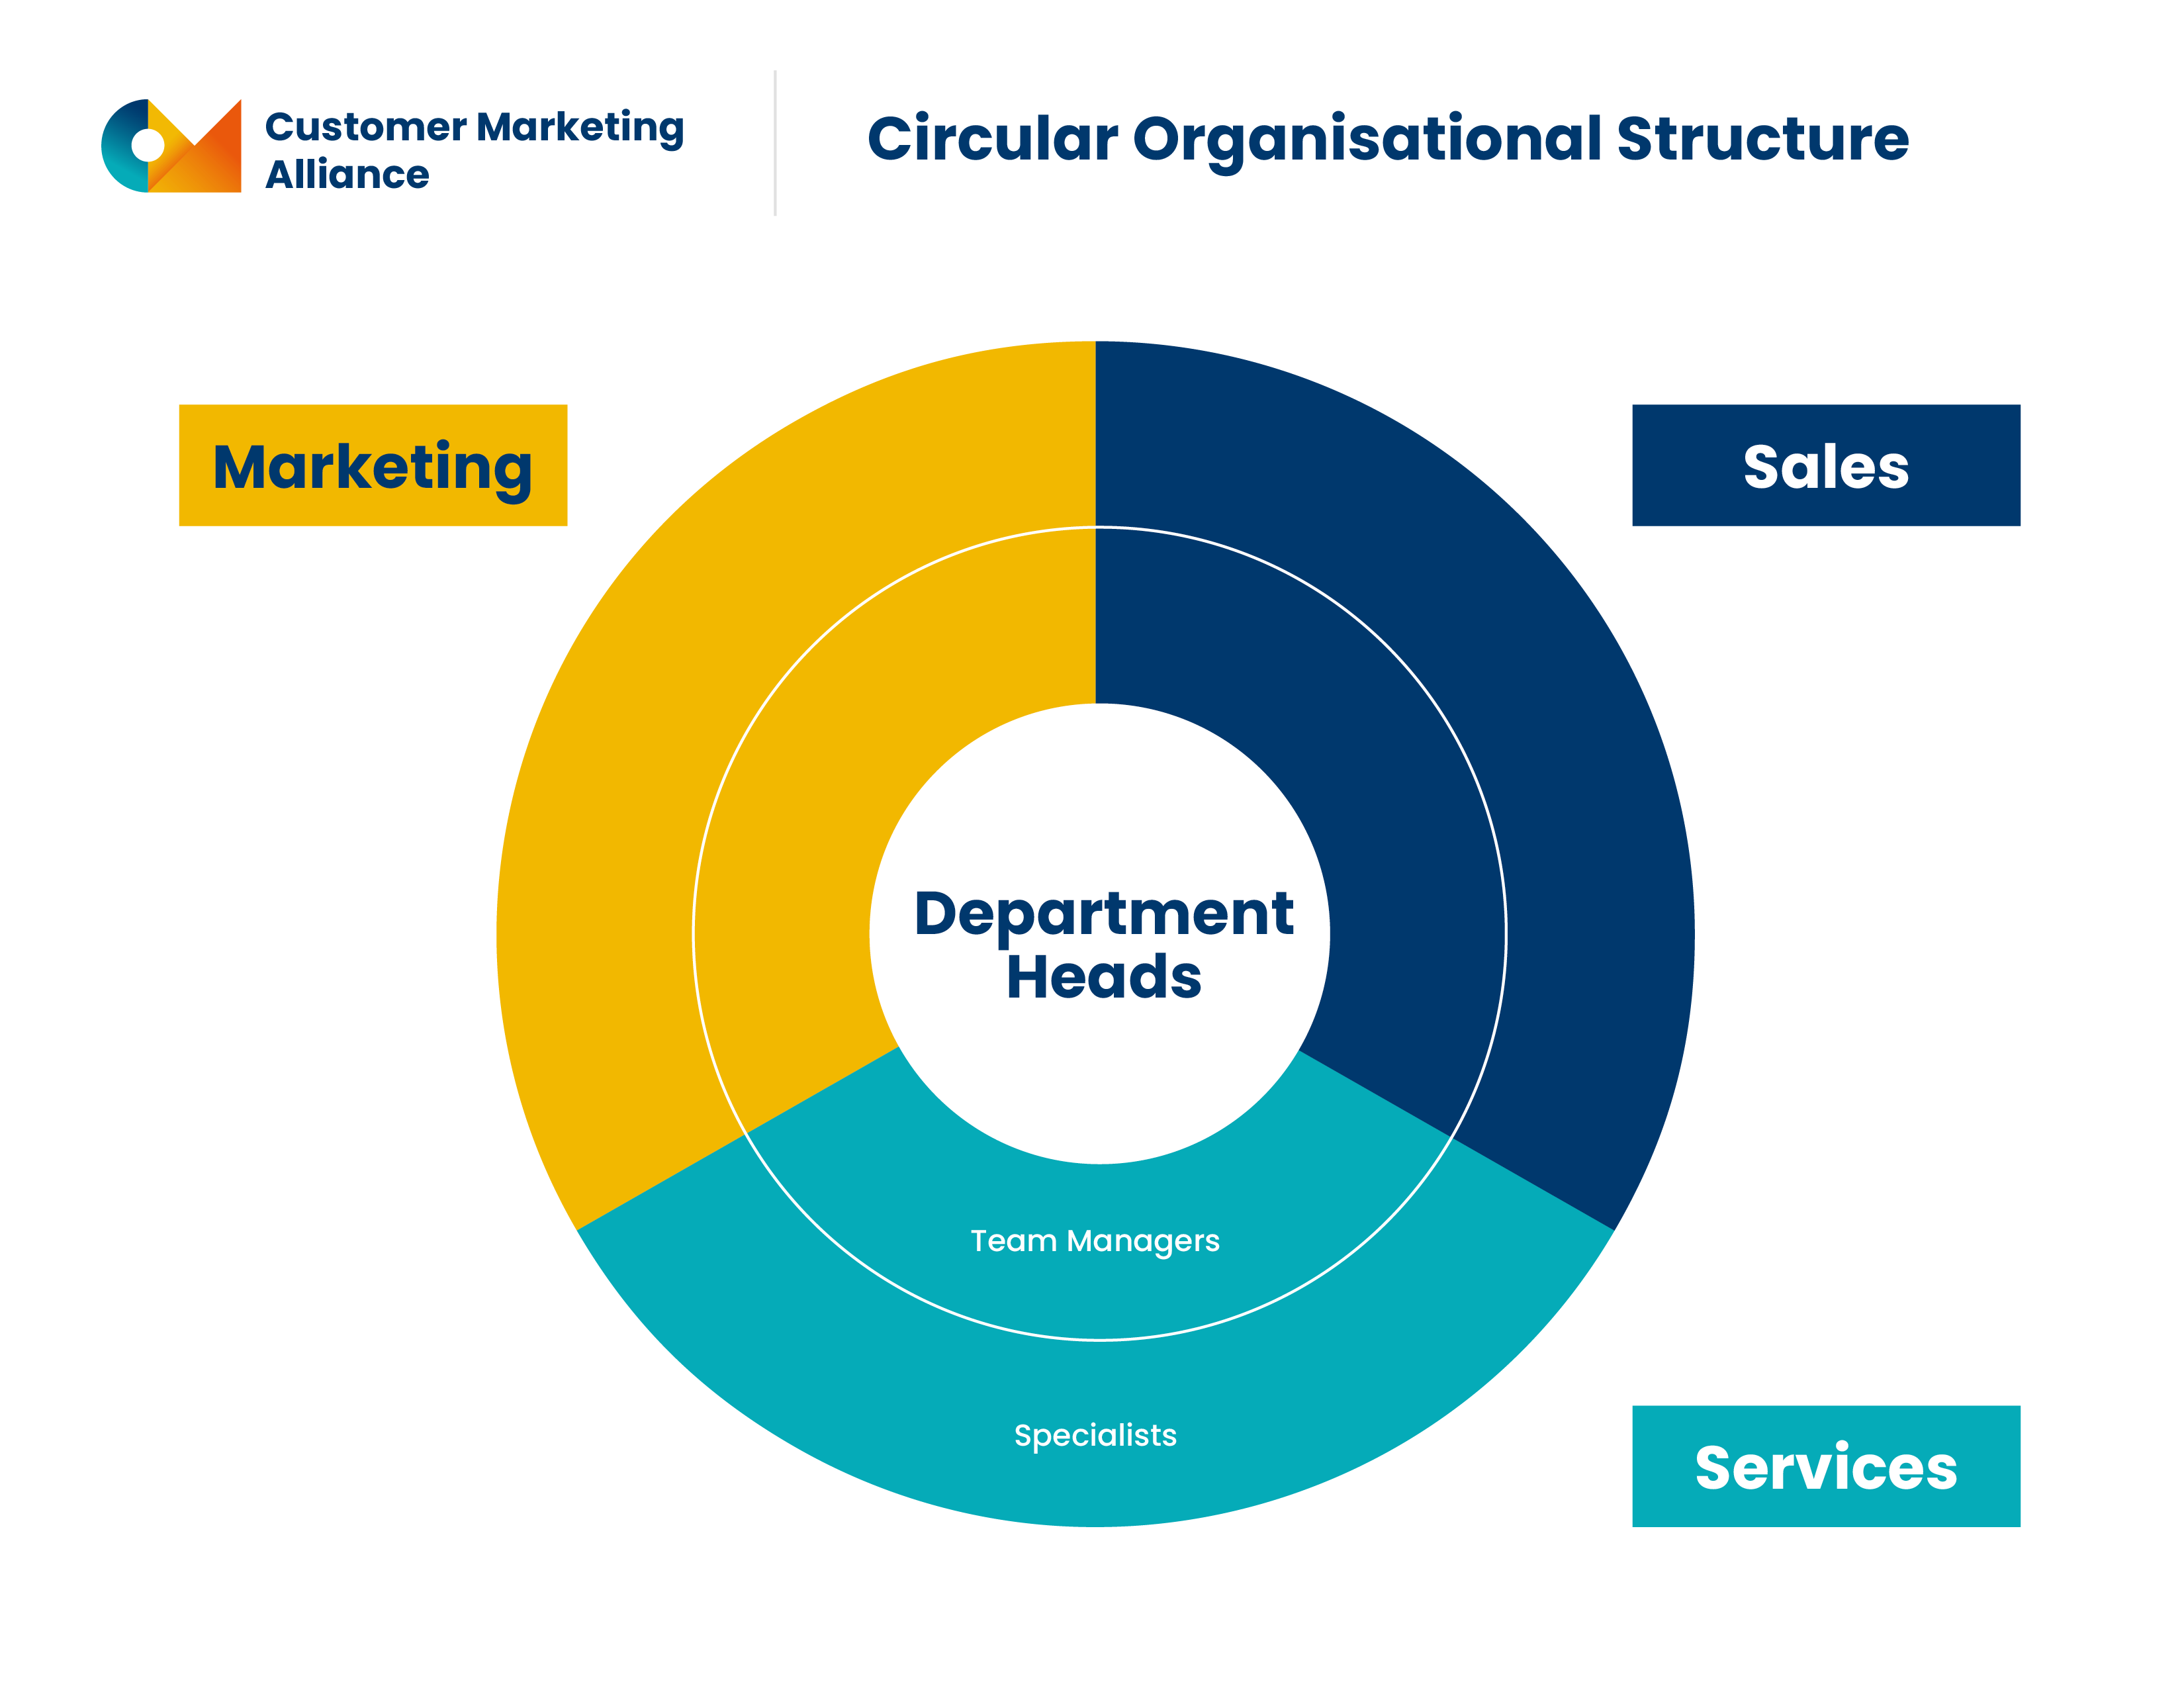 Circle chart showing a marketing organizational structure with CMO or leader in the middle, with team managers, and specialists on the outer circles. Other departments such as product, sales, and services then branch off from that.